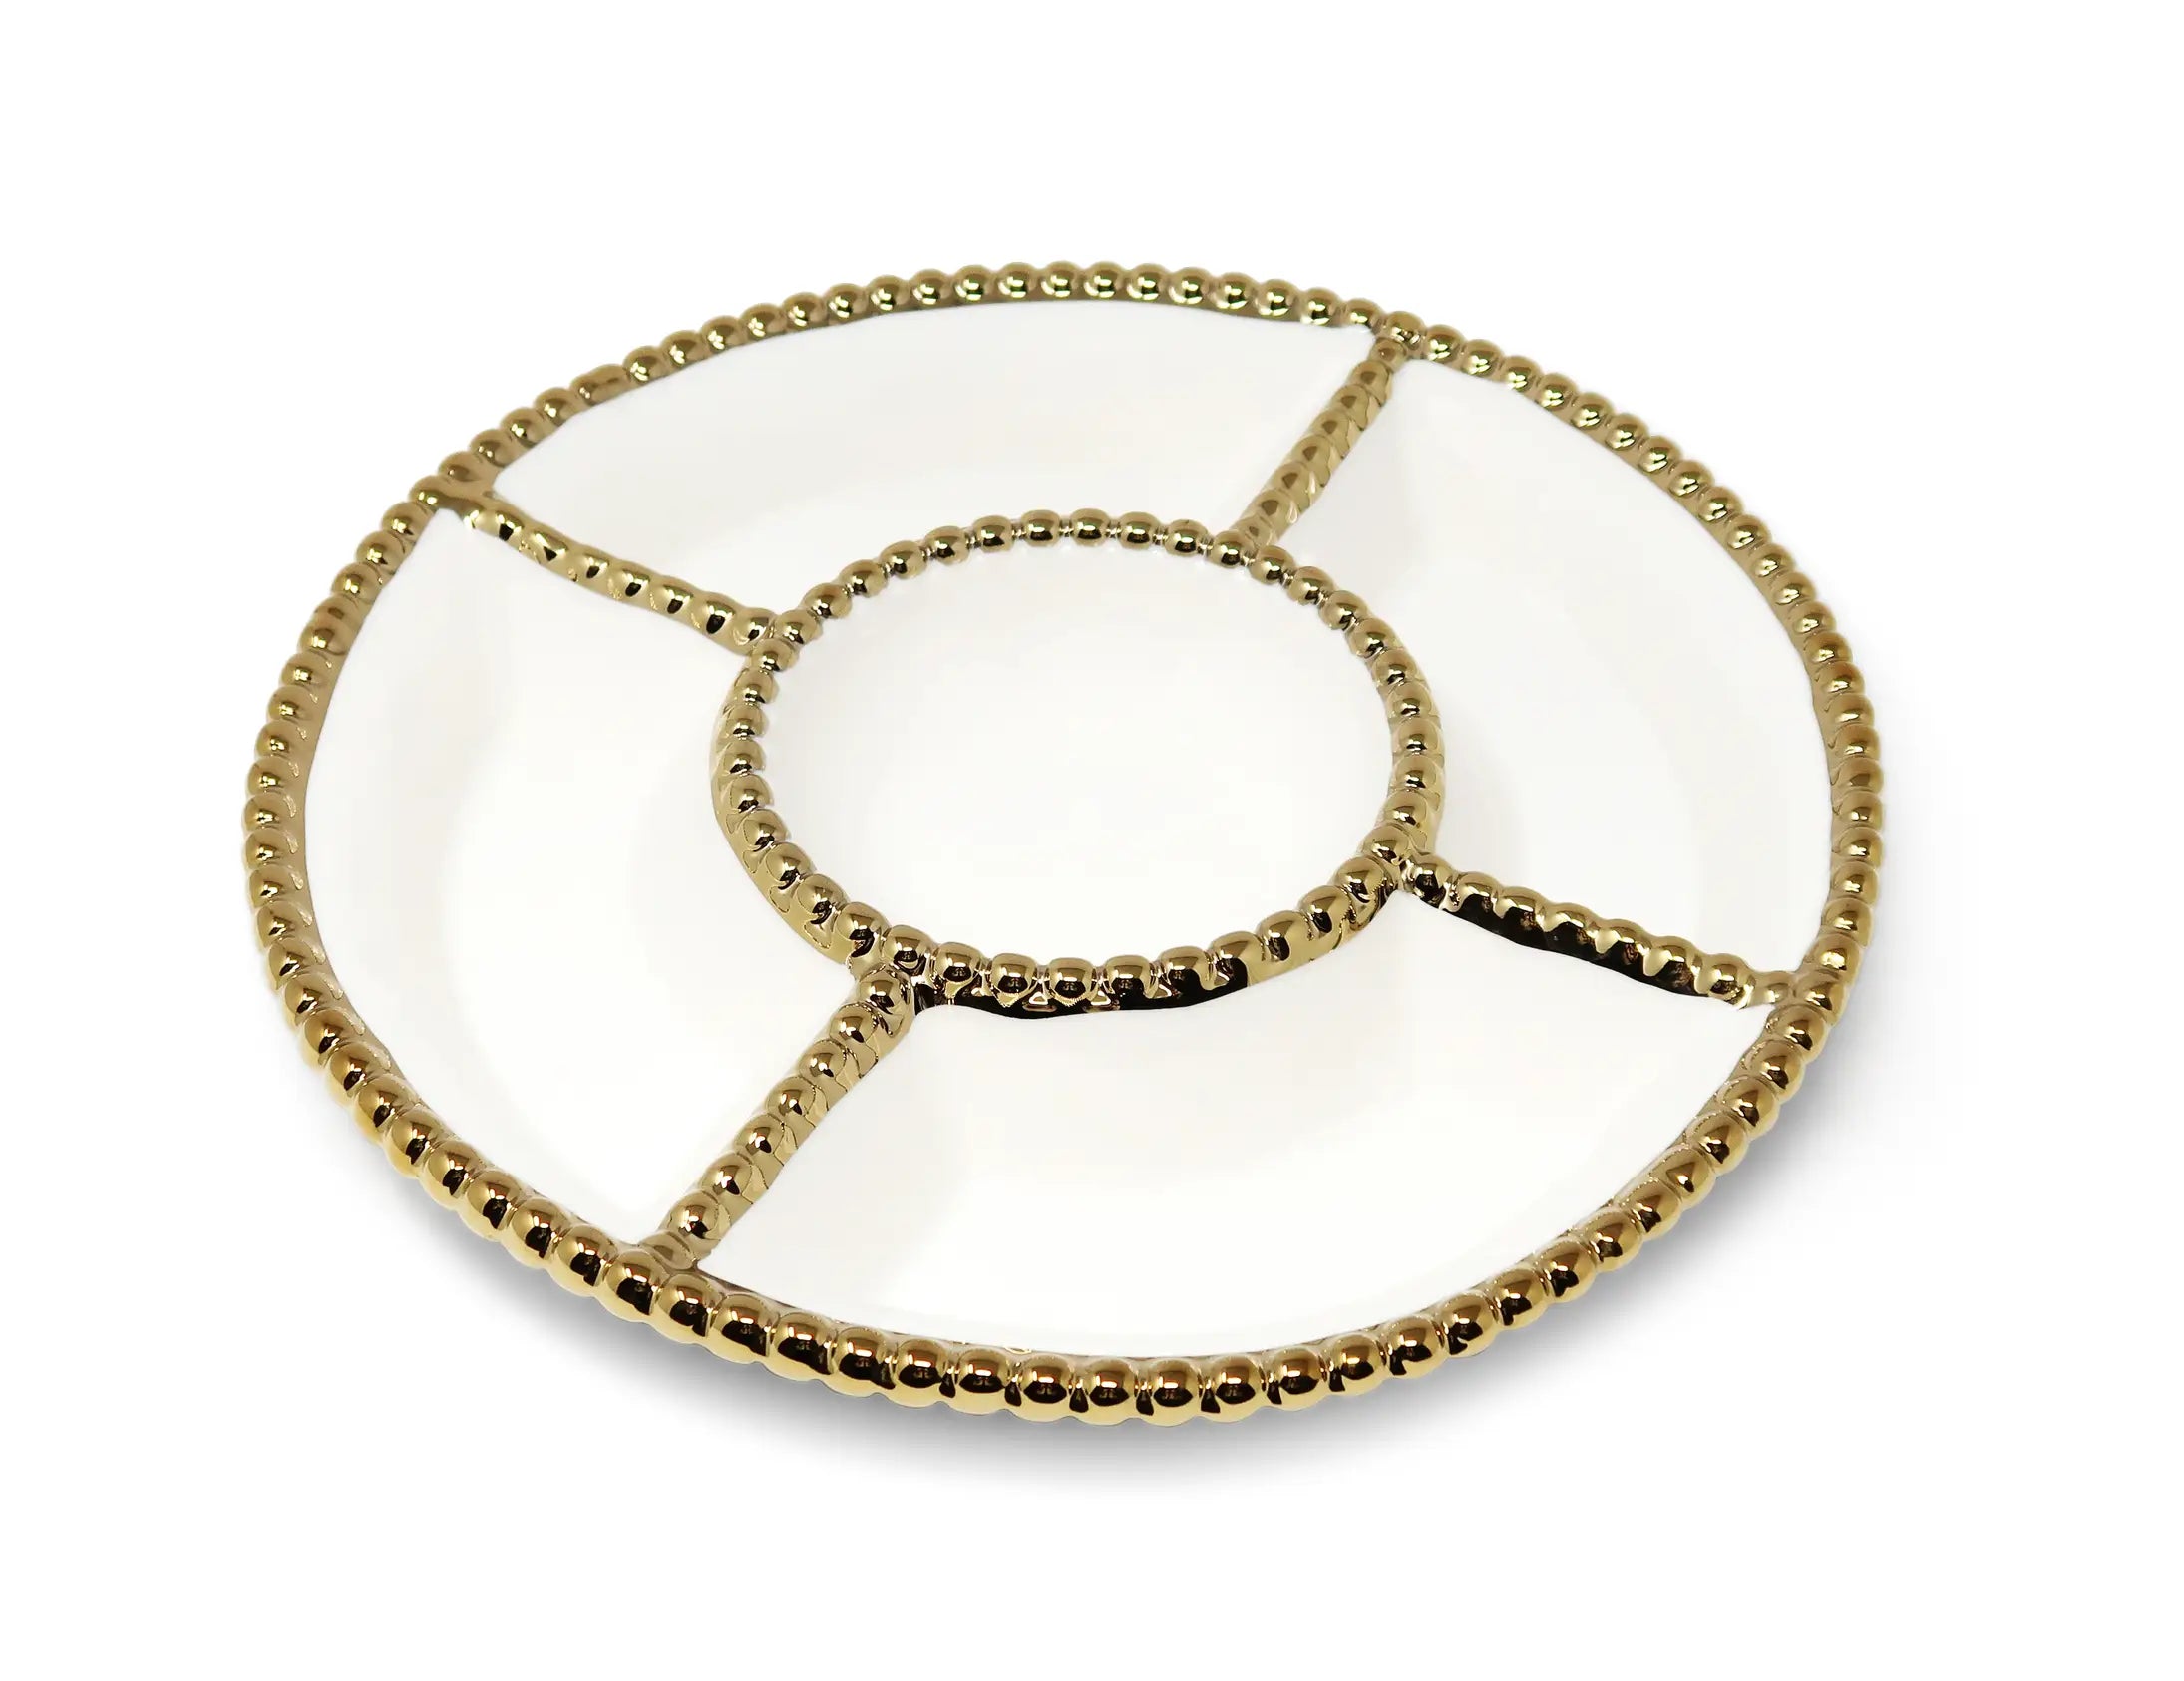 White porcelain Chip and dip platter with beaded trim